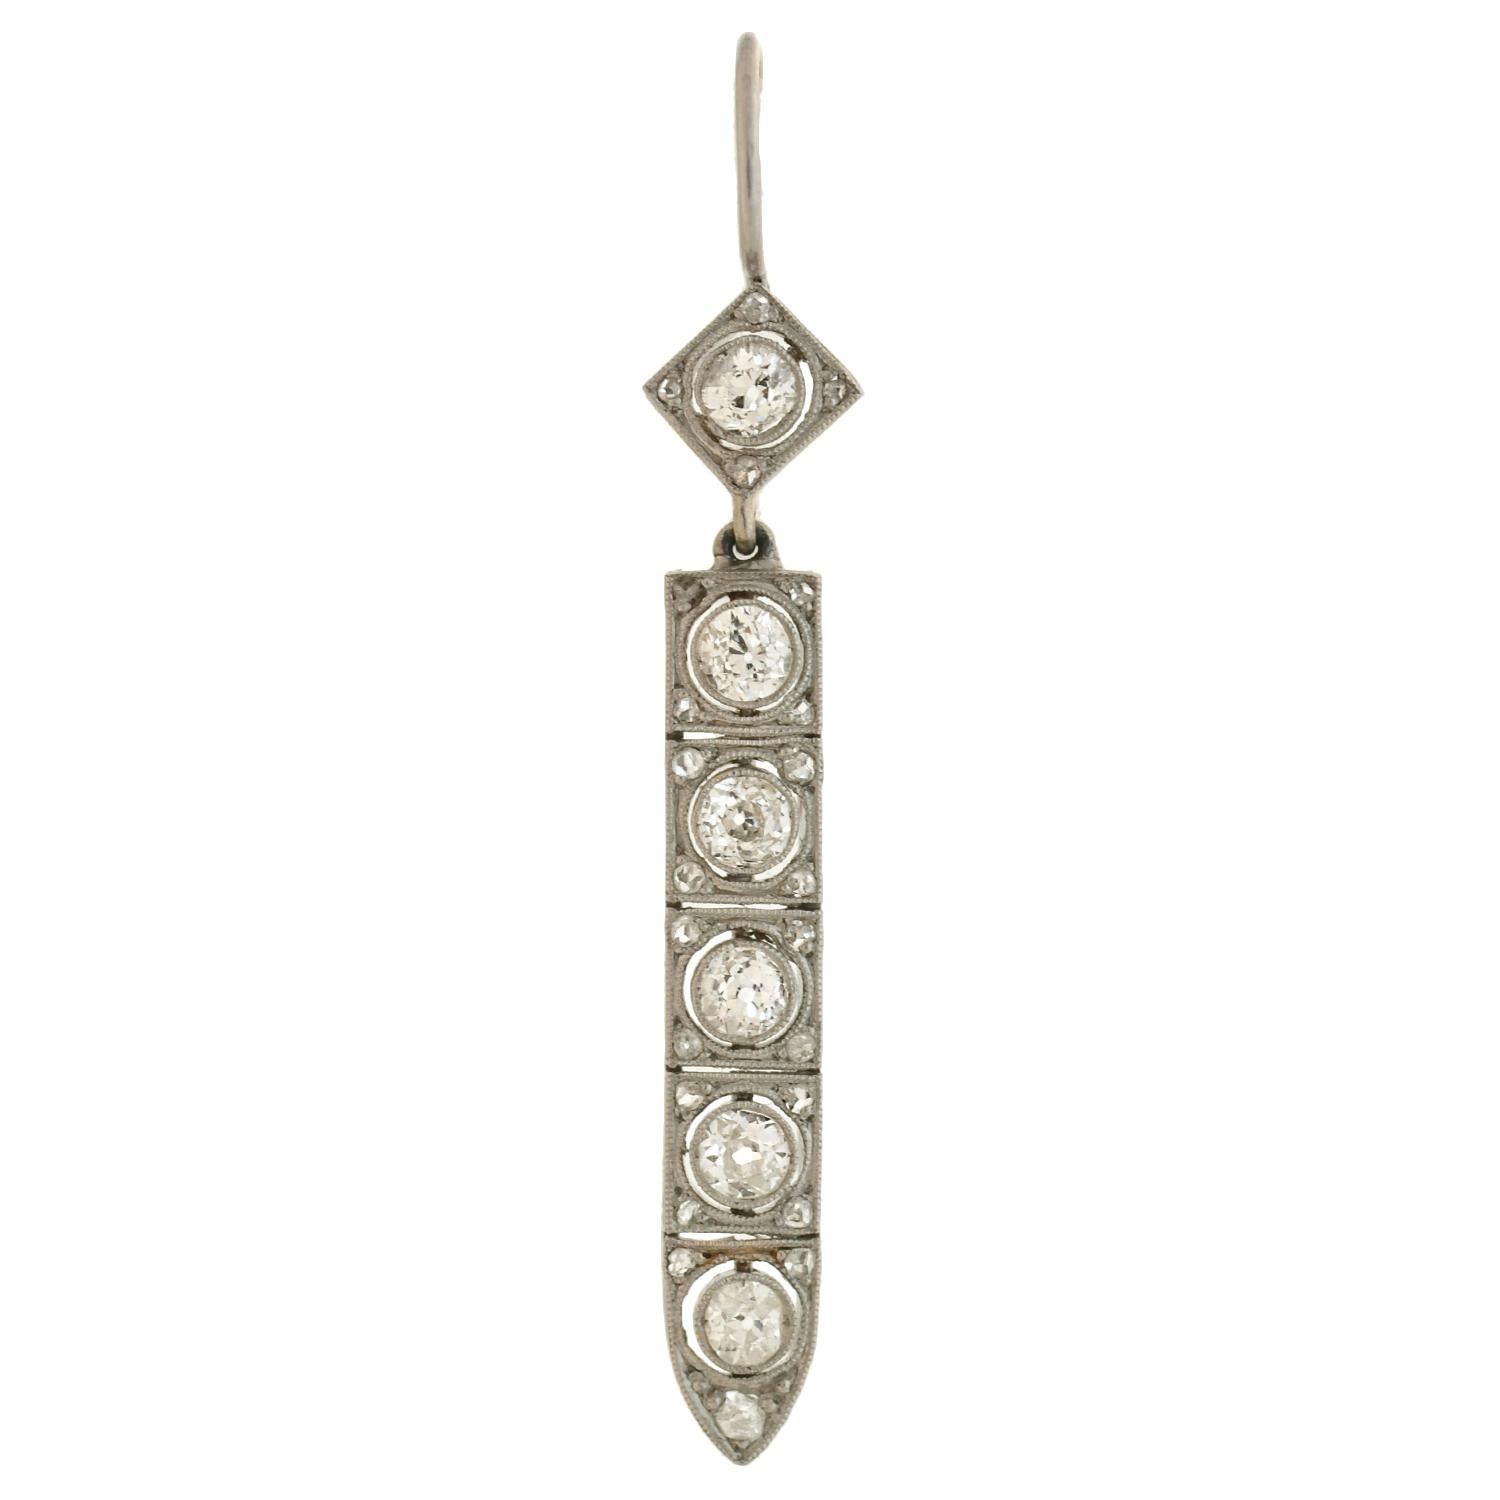 Exquisite diamond earrings from the Art Deco (ca1920) era! Crafted in platinum, these elegant earrings feature dangling links that hang below complimentary surmounts. Each elongated link is lined with 5 sparkling old Mine cut diamonds, which are